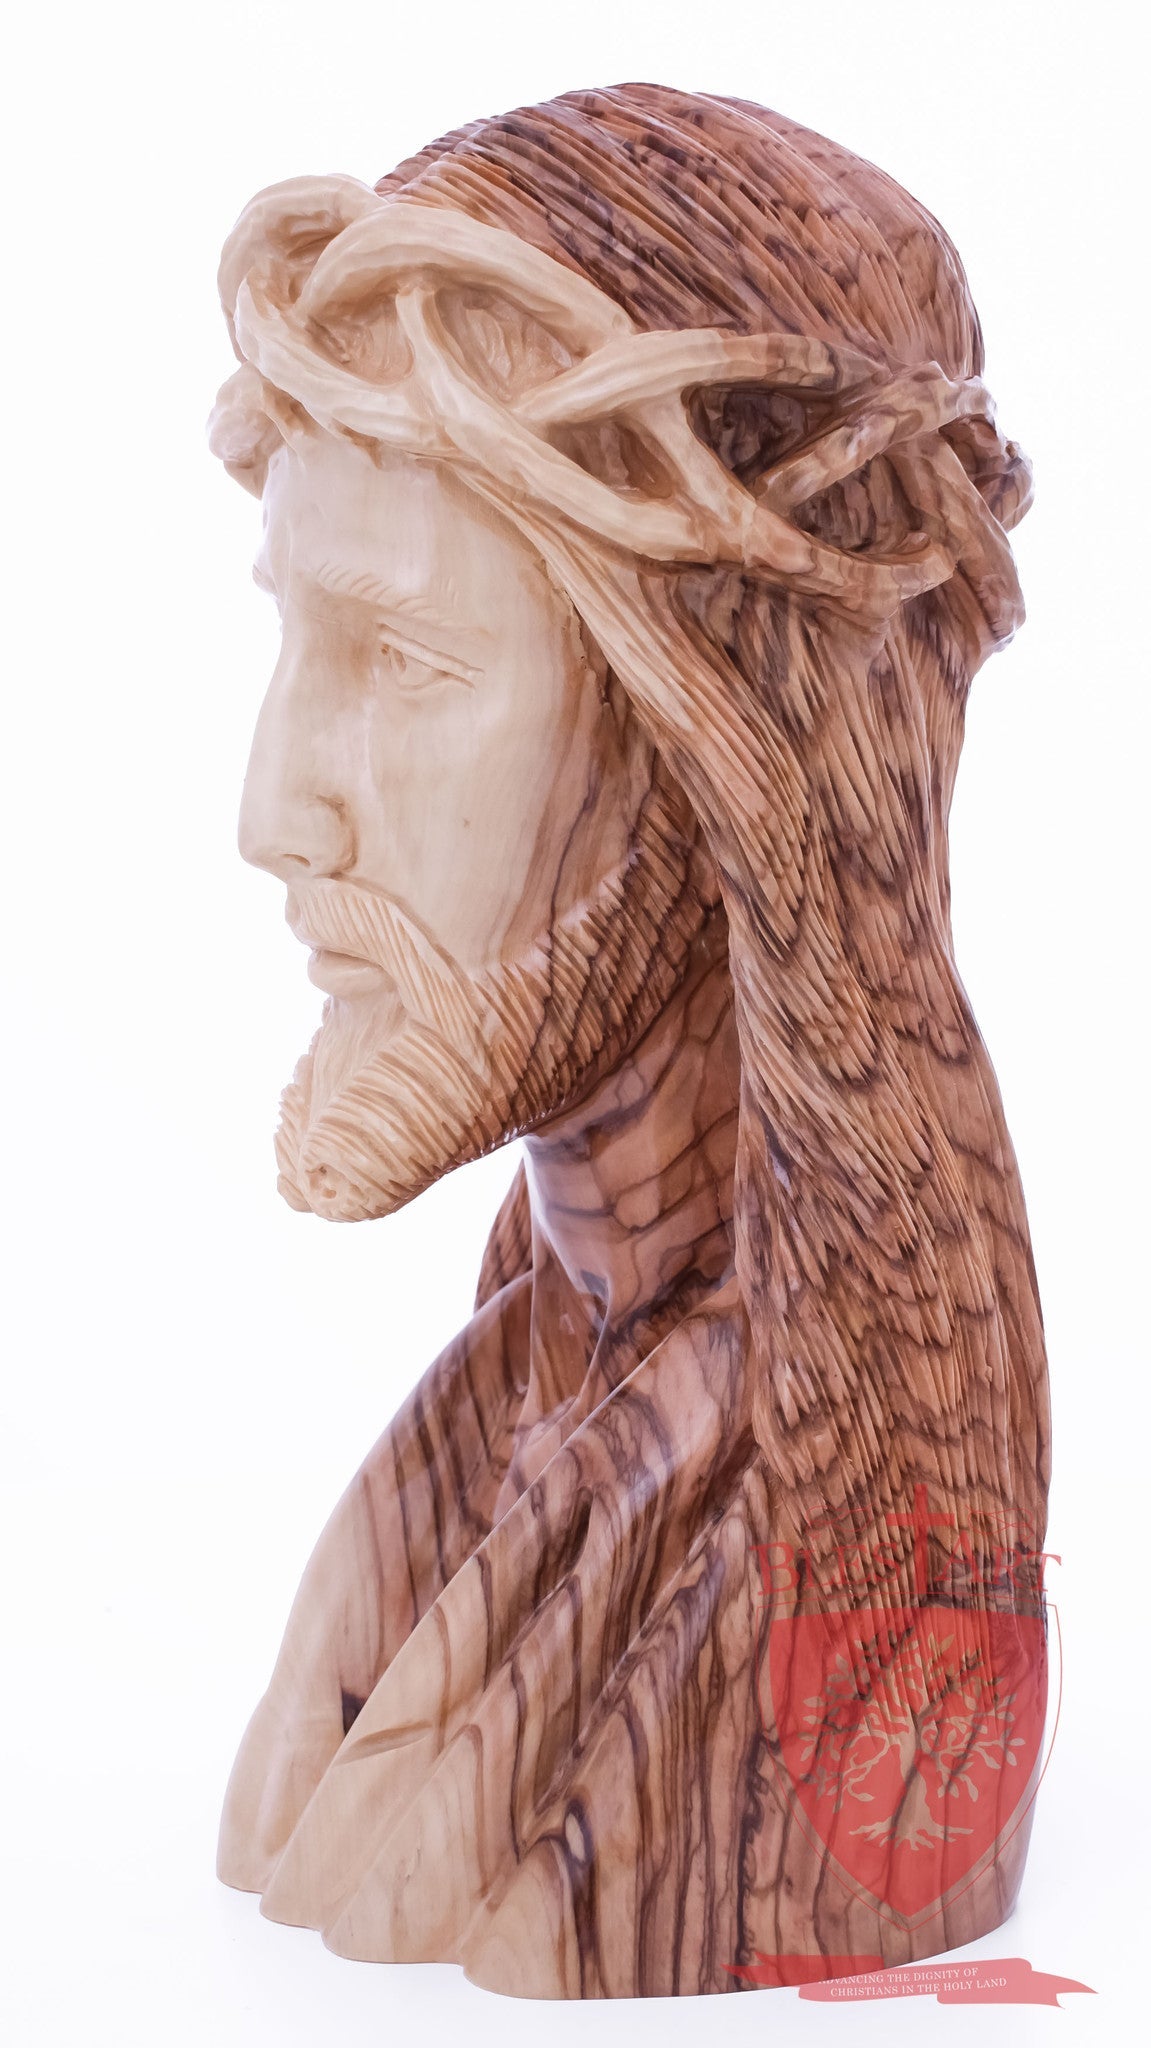 Bust of Jesus, Size: 4" 3.5" 9"